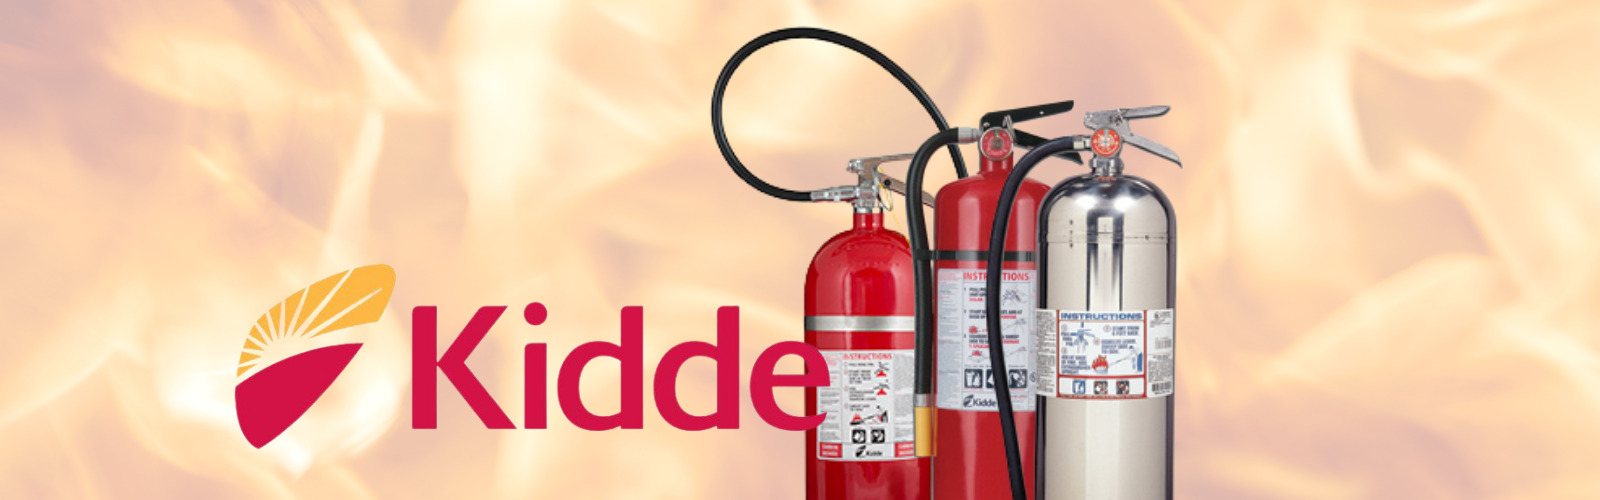 Kidde Fire Protection Products distributed by Koetter Fire Protection